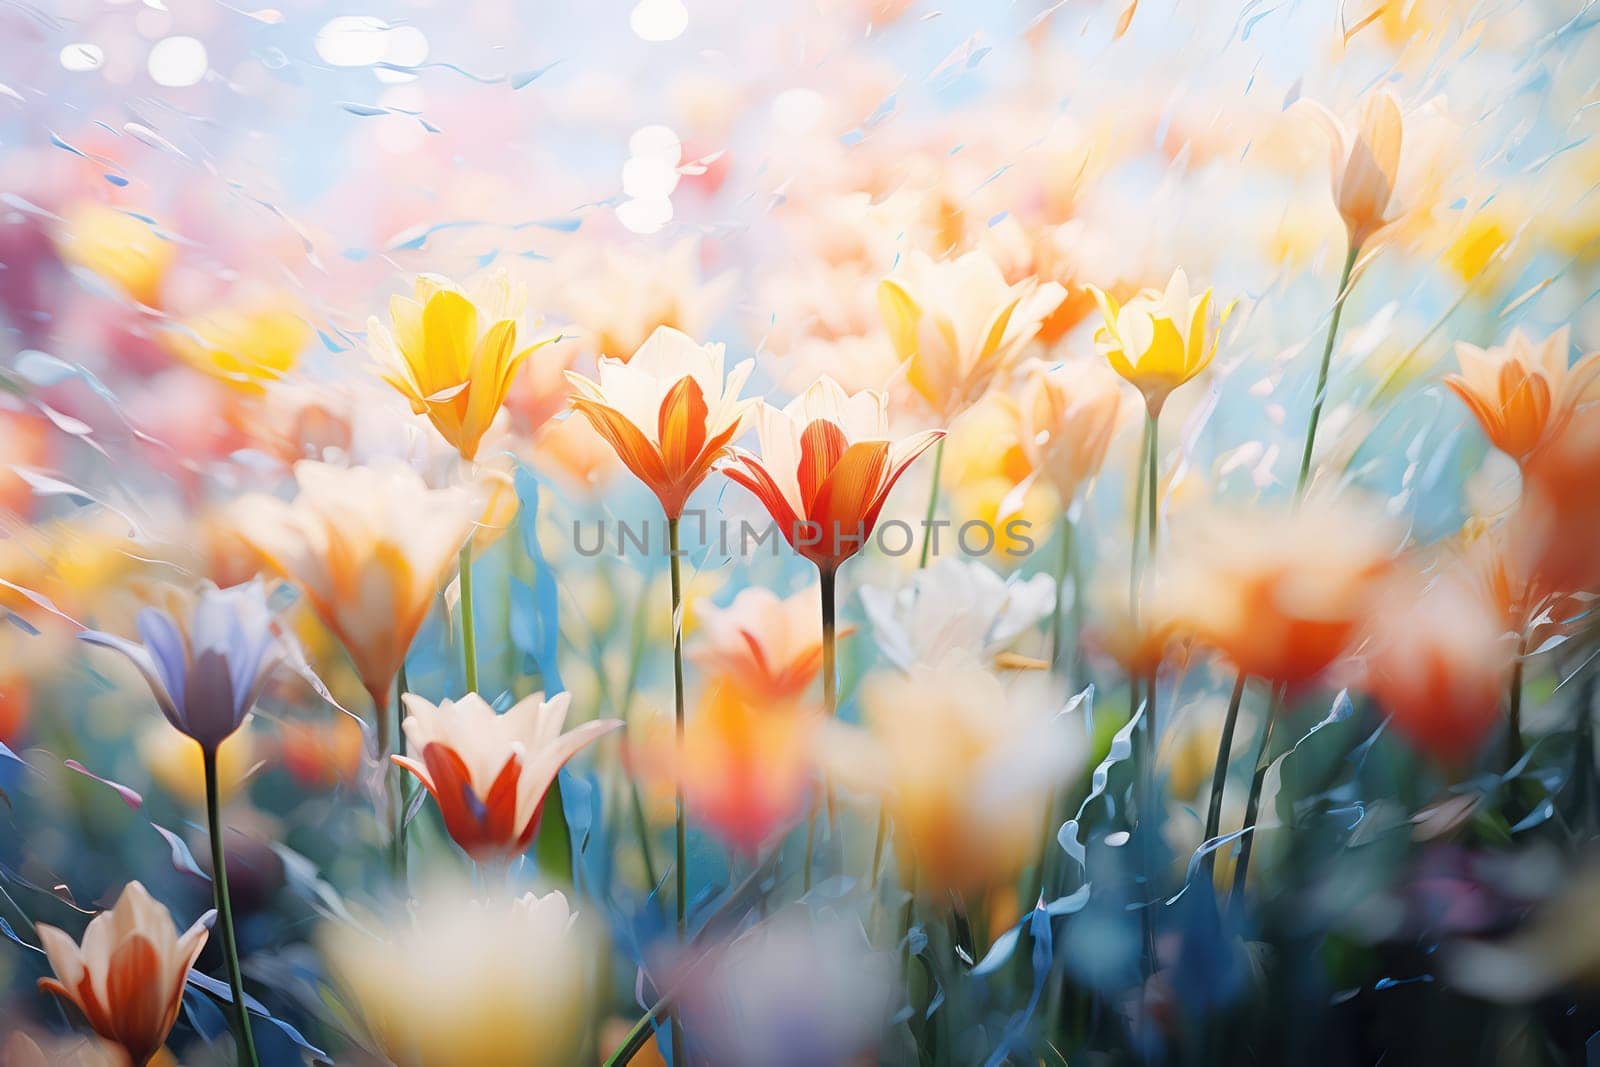 Blooming Tulips in a Colorful Spring Meadow: Captivating Beauty and Freshness, with Vibrant Red and Pink Floral Wonderland Against a Bright Green Background by Vichizh